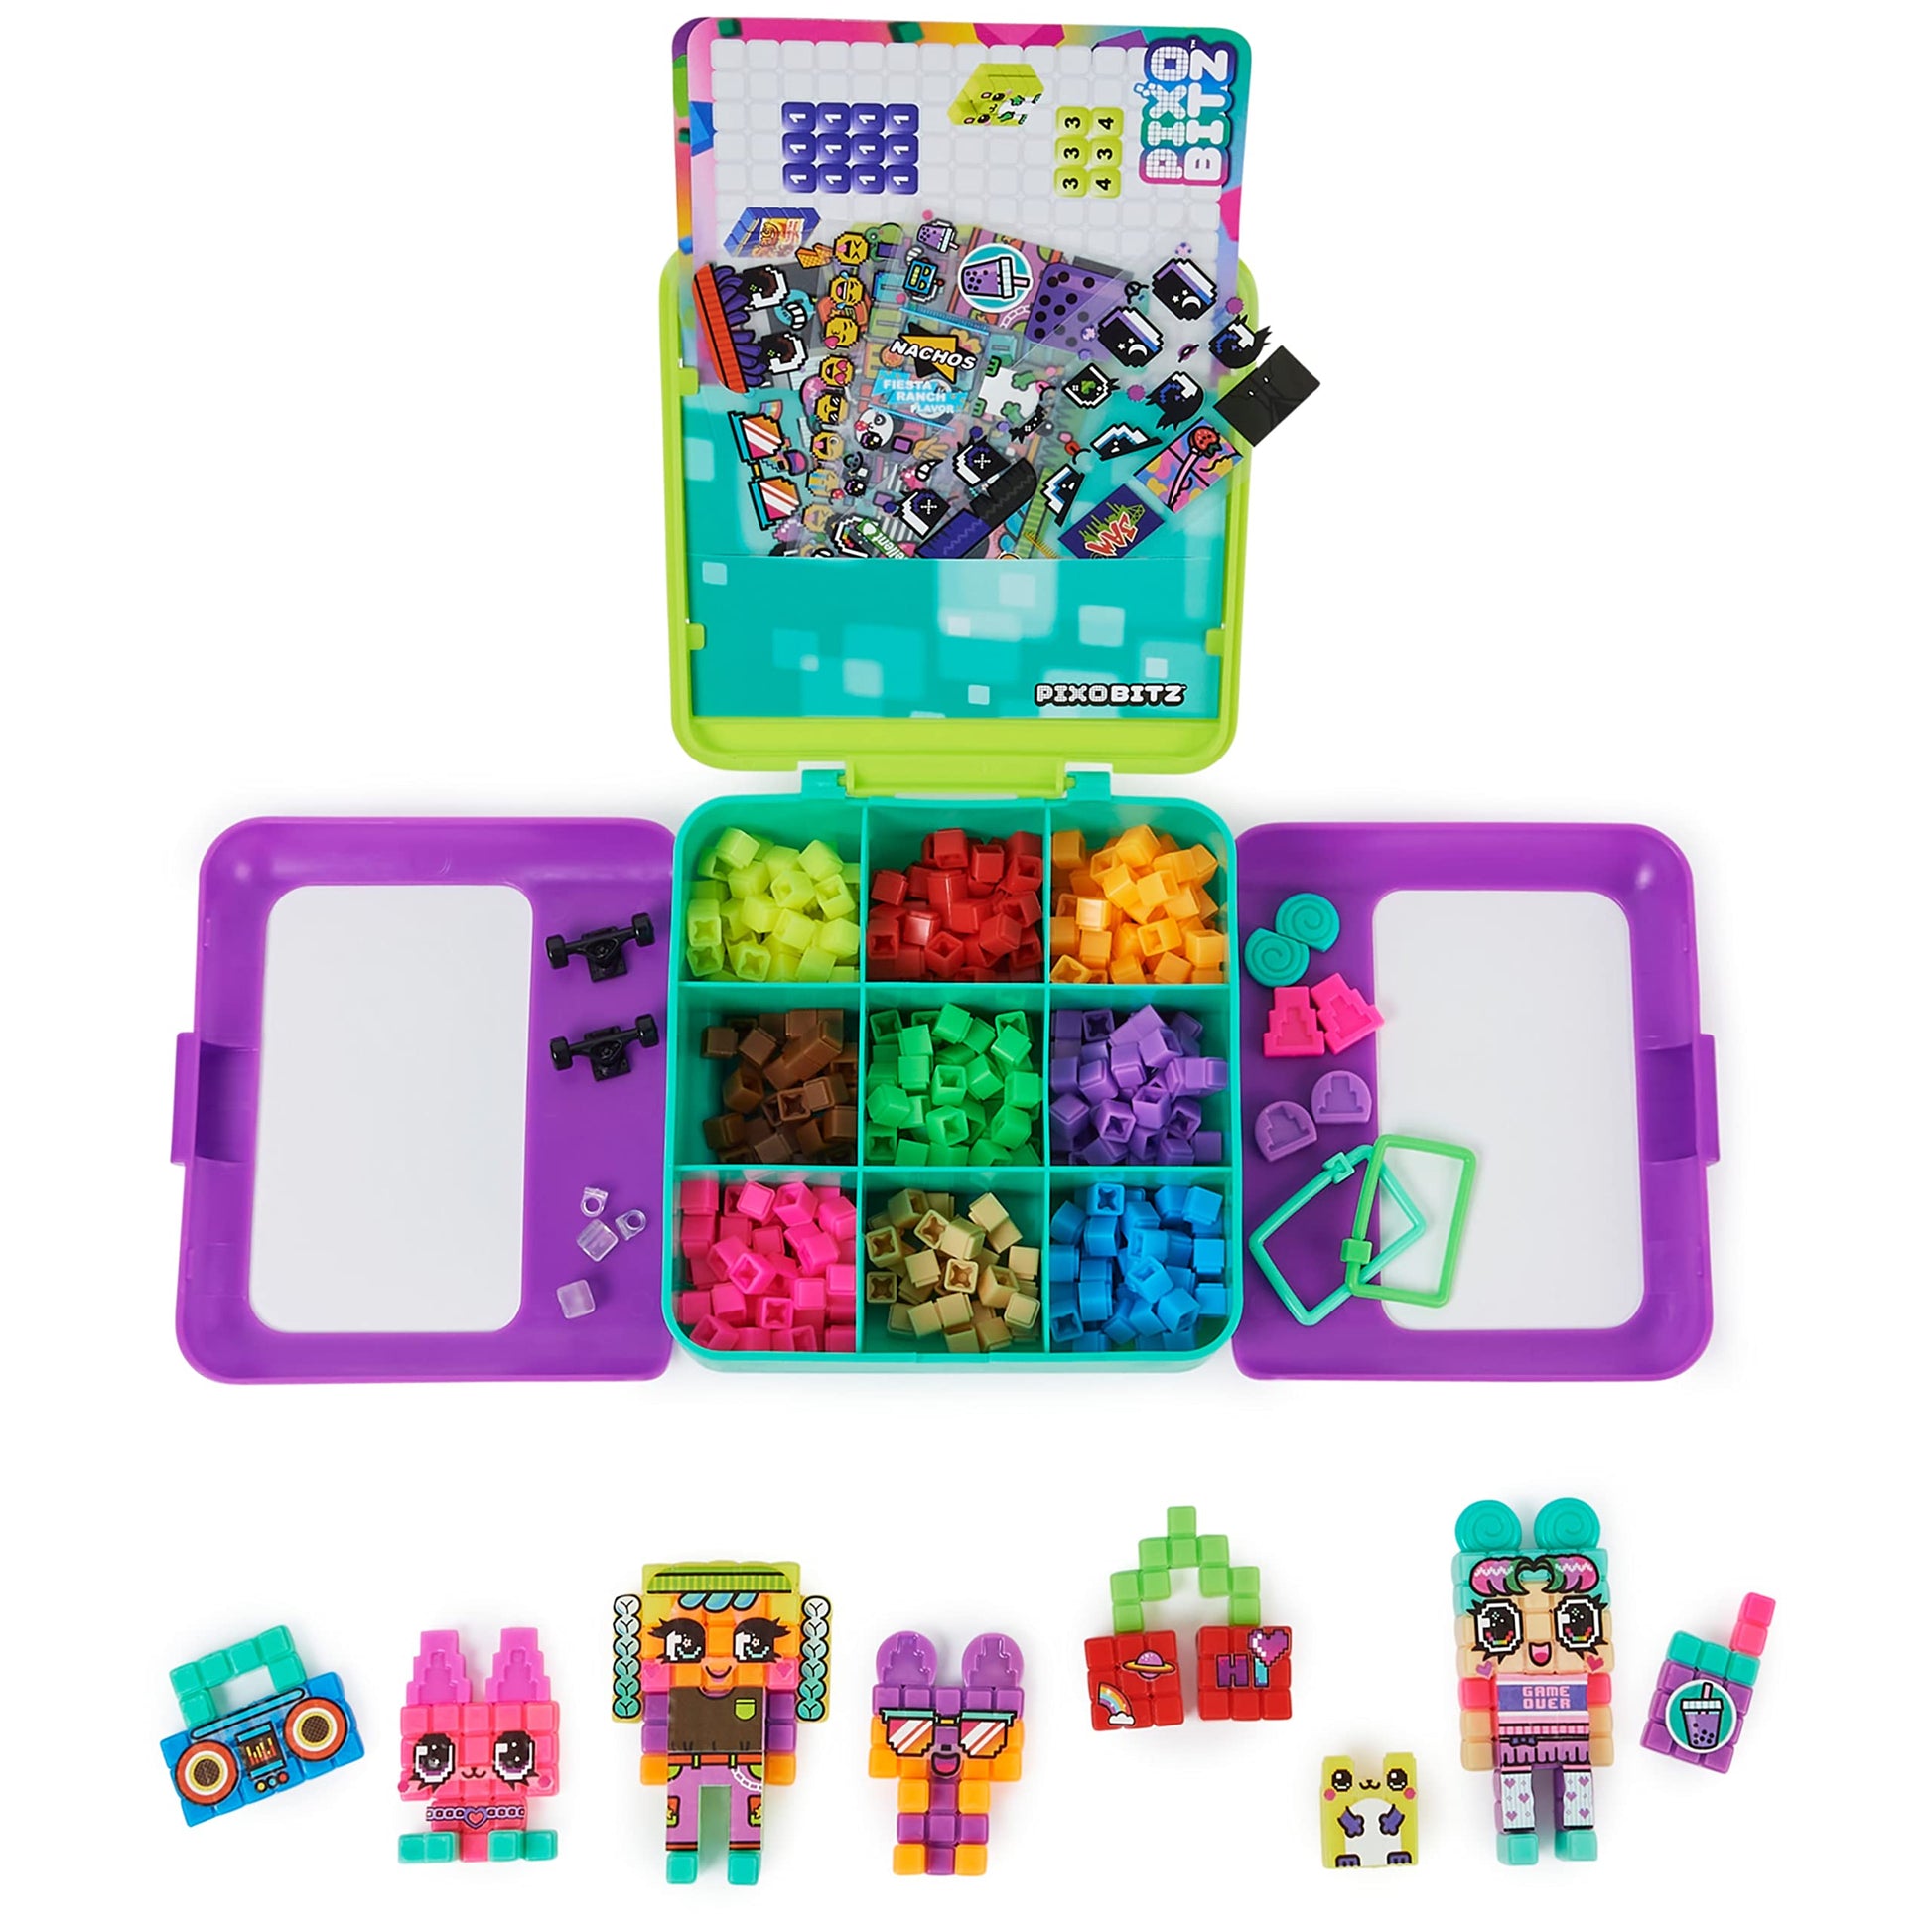 Pixobitz Studio 500 Water Fuse Beads, Decos and Accessories, Makes 3D Creations without Heat Creative Activity STEM Arts and Crafts Kids? Toys for Ages 6 and up - Zippigames